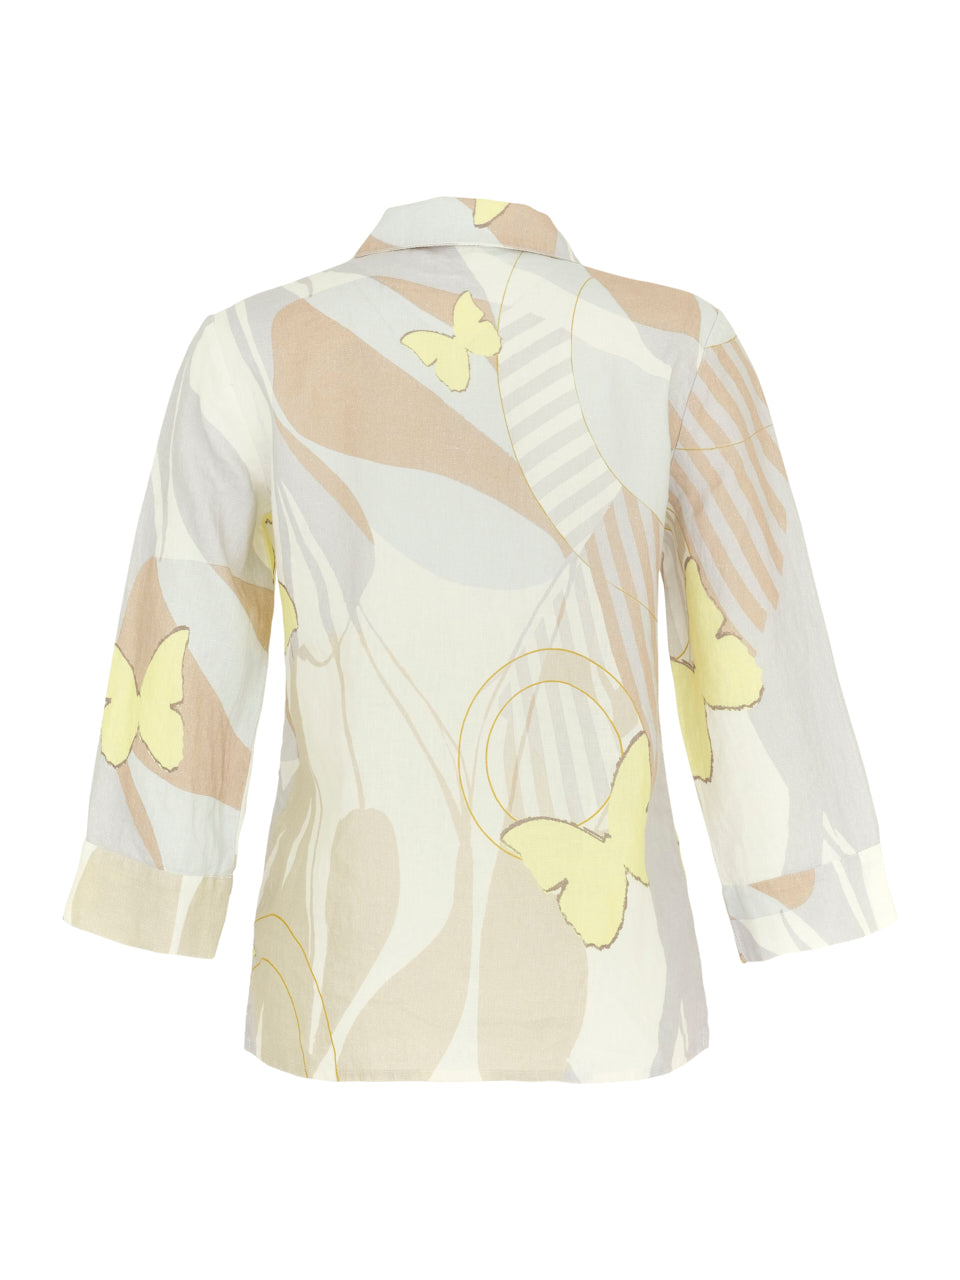 LIGHT & MELO SHIRT WITH PLEATS